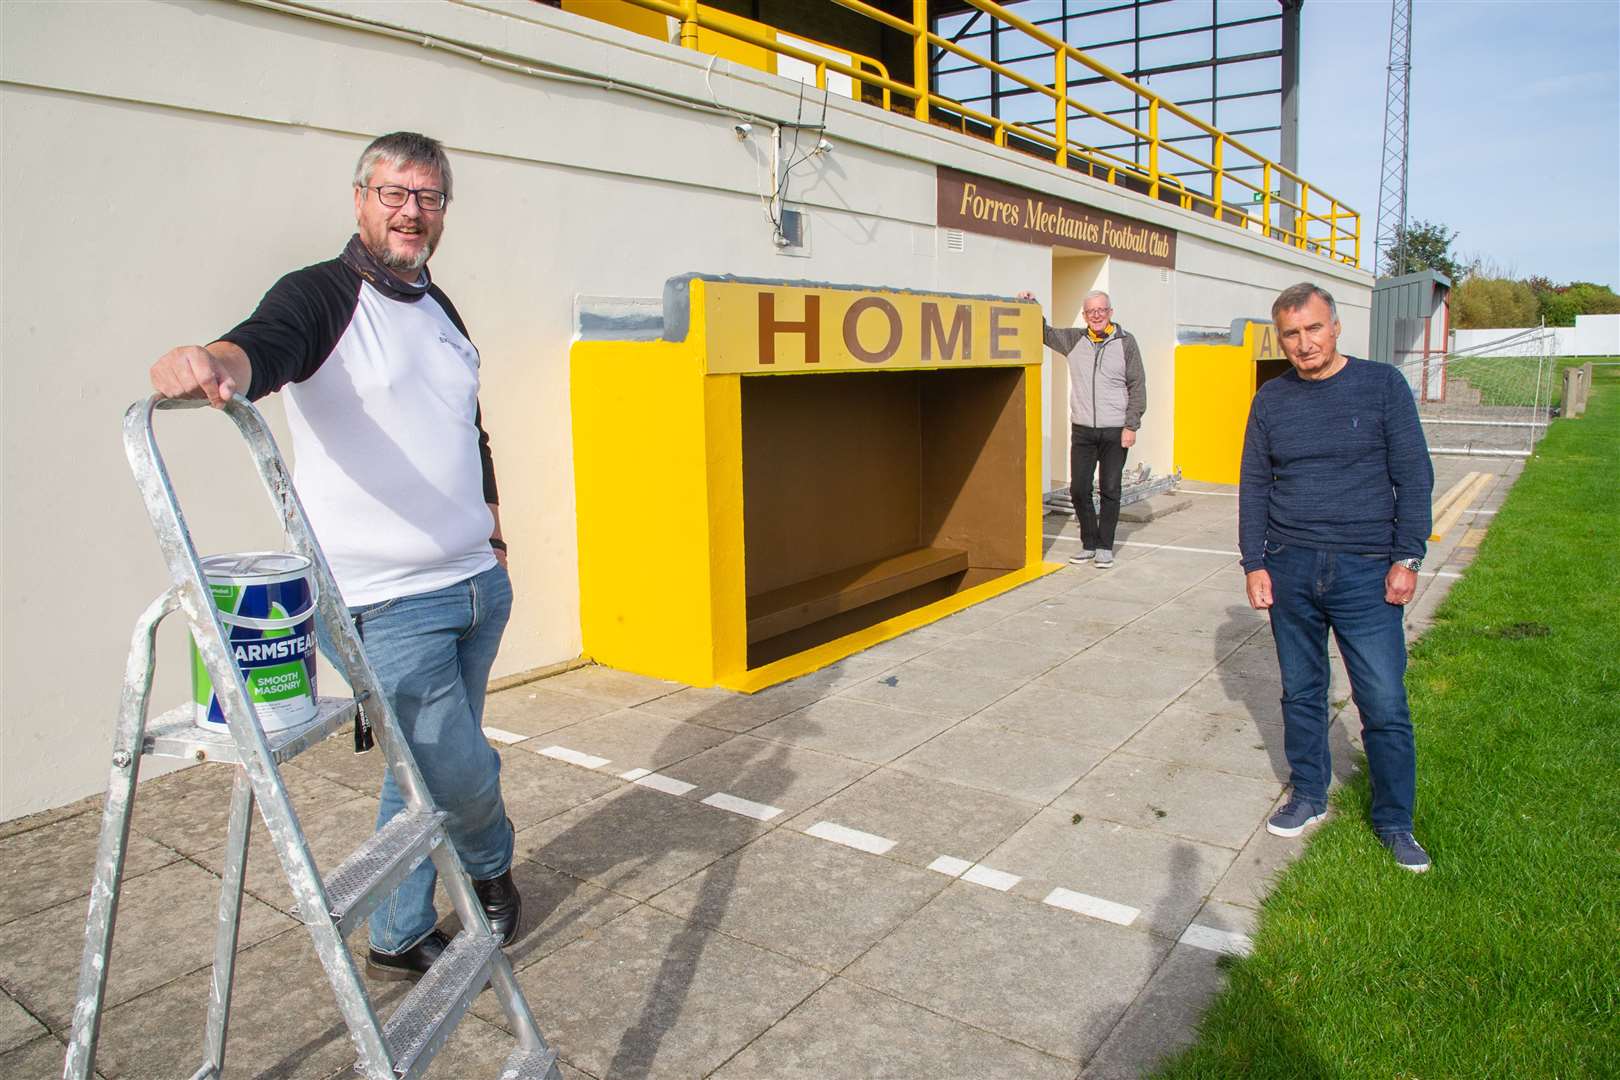 Sandy Wilkie (left) has donated £3250 to Forres Mechanics for paint work to be done around the ground. He is joined by Forres Mechanics financial director Sandy Aird and chairman Dave MacDonald. Picture: Daniel Forsyth